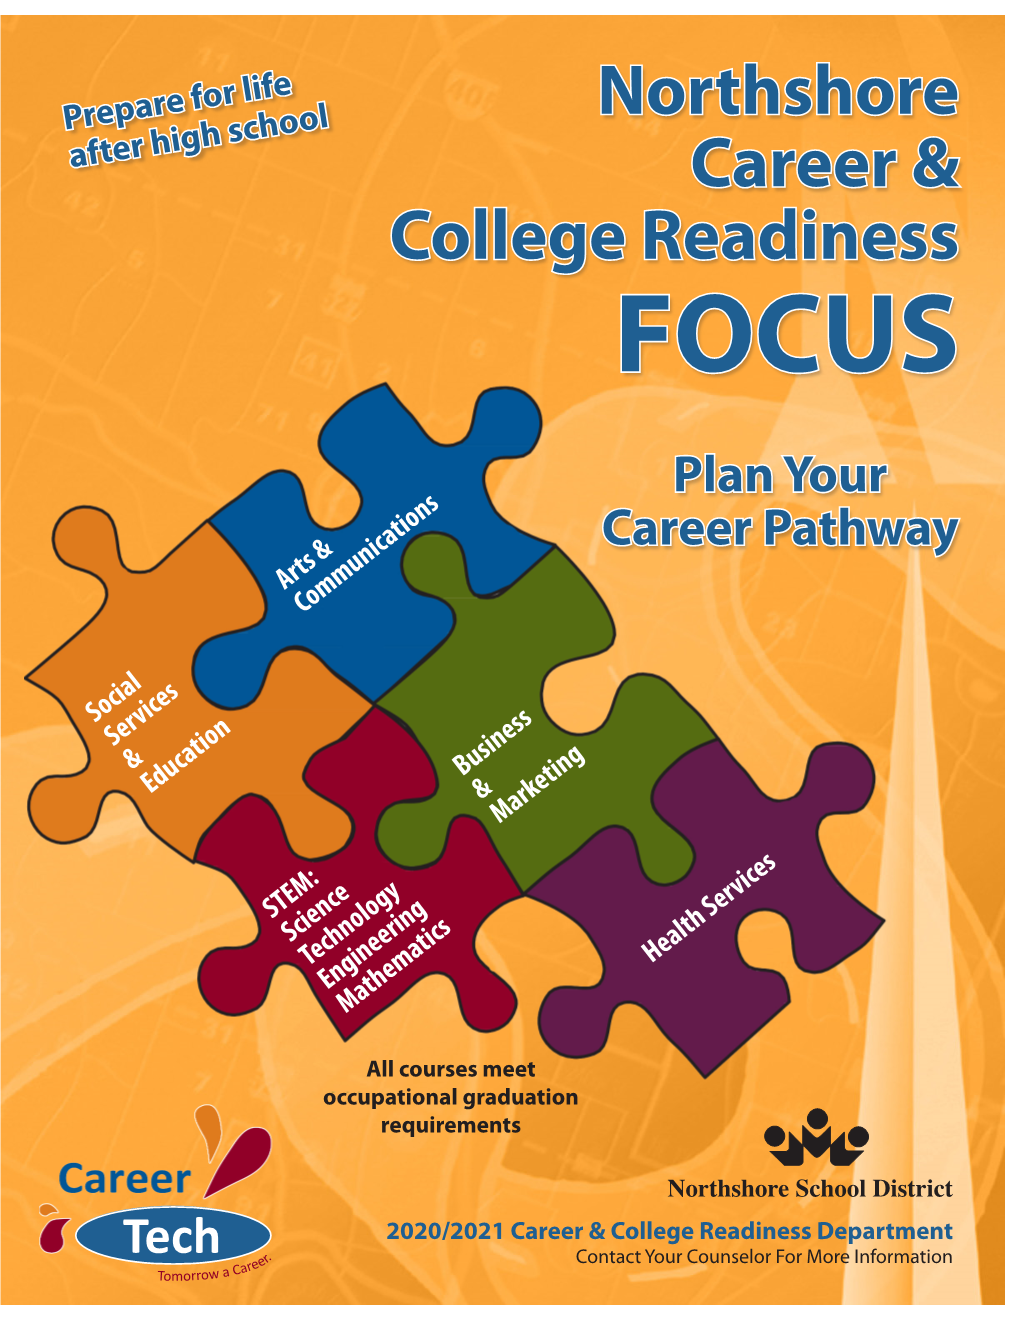 Northshore Career & College Readiness